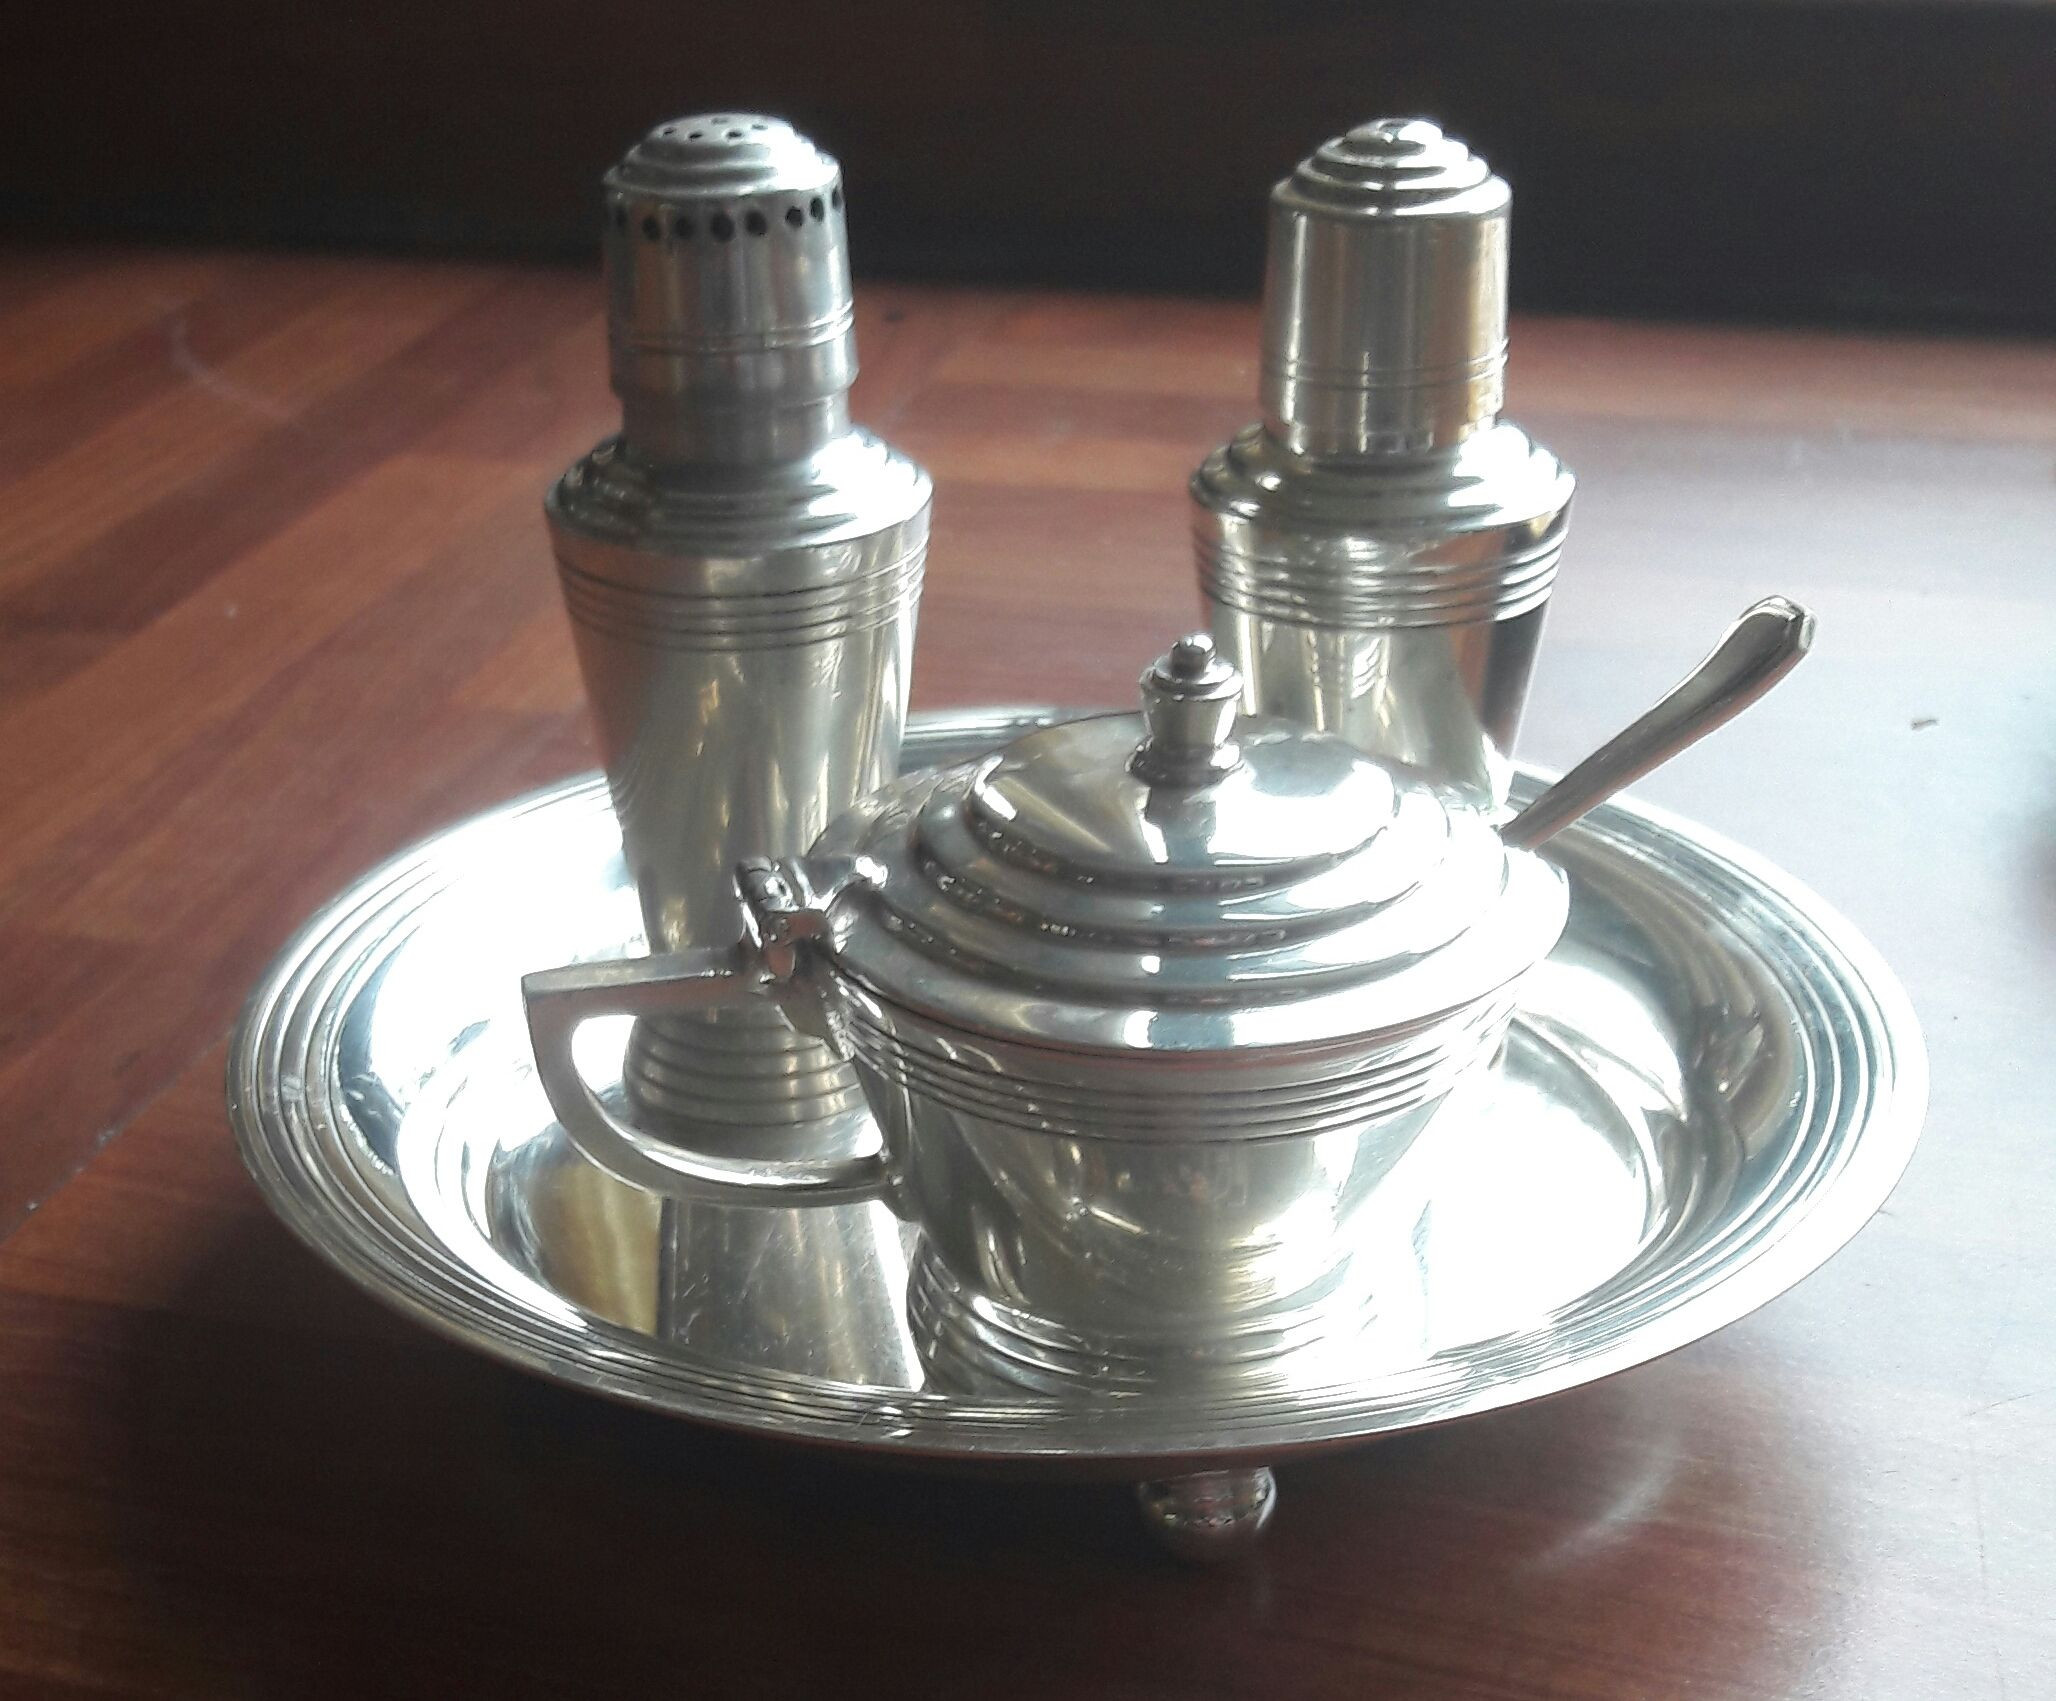 25 Awesome Round Silver Vase 2024 free download round silver vase of keith murray silver plated cruet made by mappin webb variant with in keith murray silver plated cruet made by mappin webb variant with round tray and vase salt